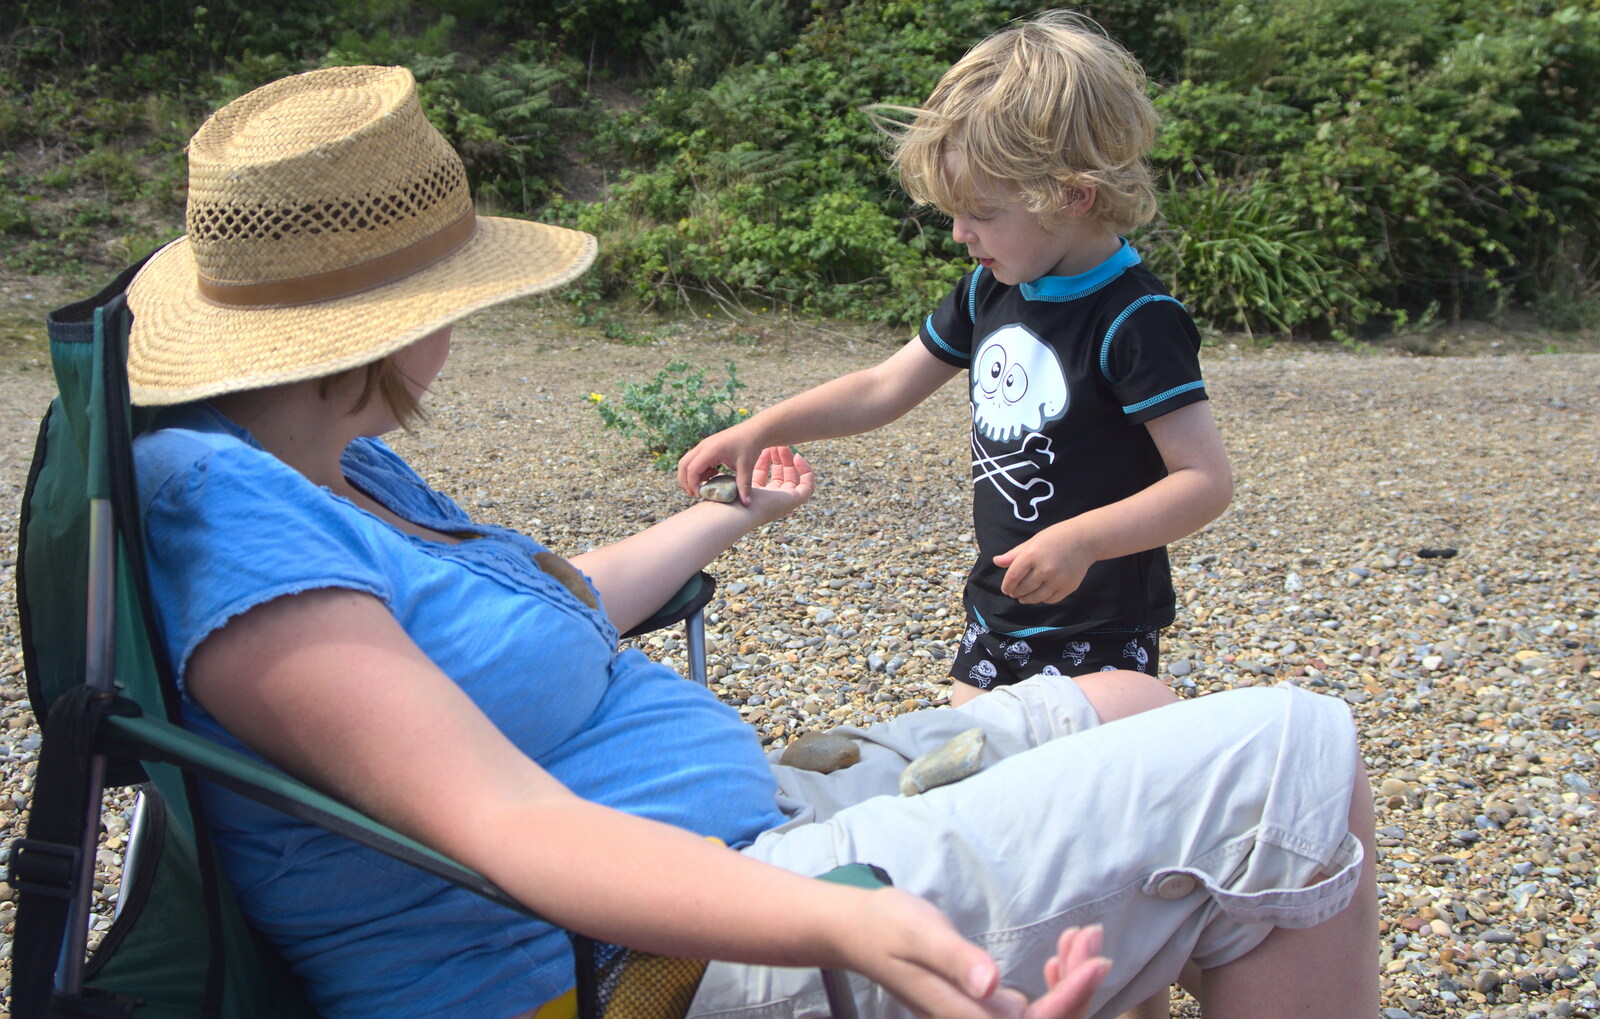 Fred balances a stone on Isobel from Camping by the Seaside, Cliff House, Dunwich, Suffolk - 15th August 2012